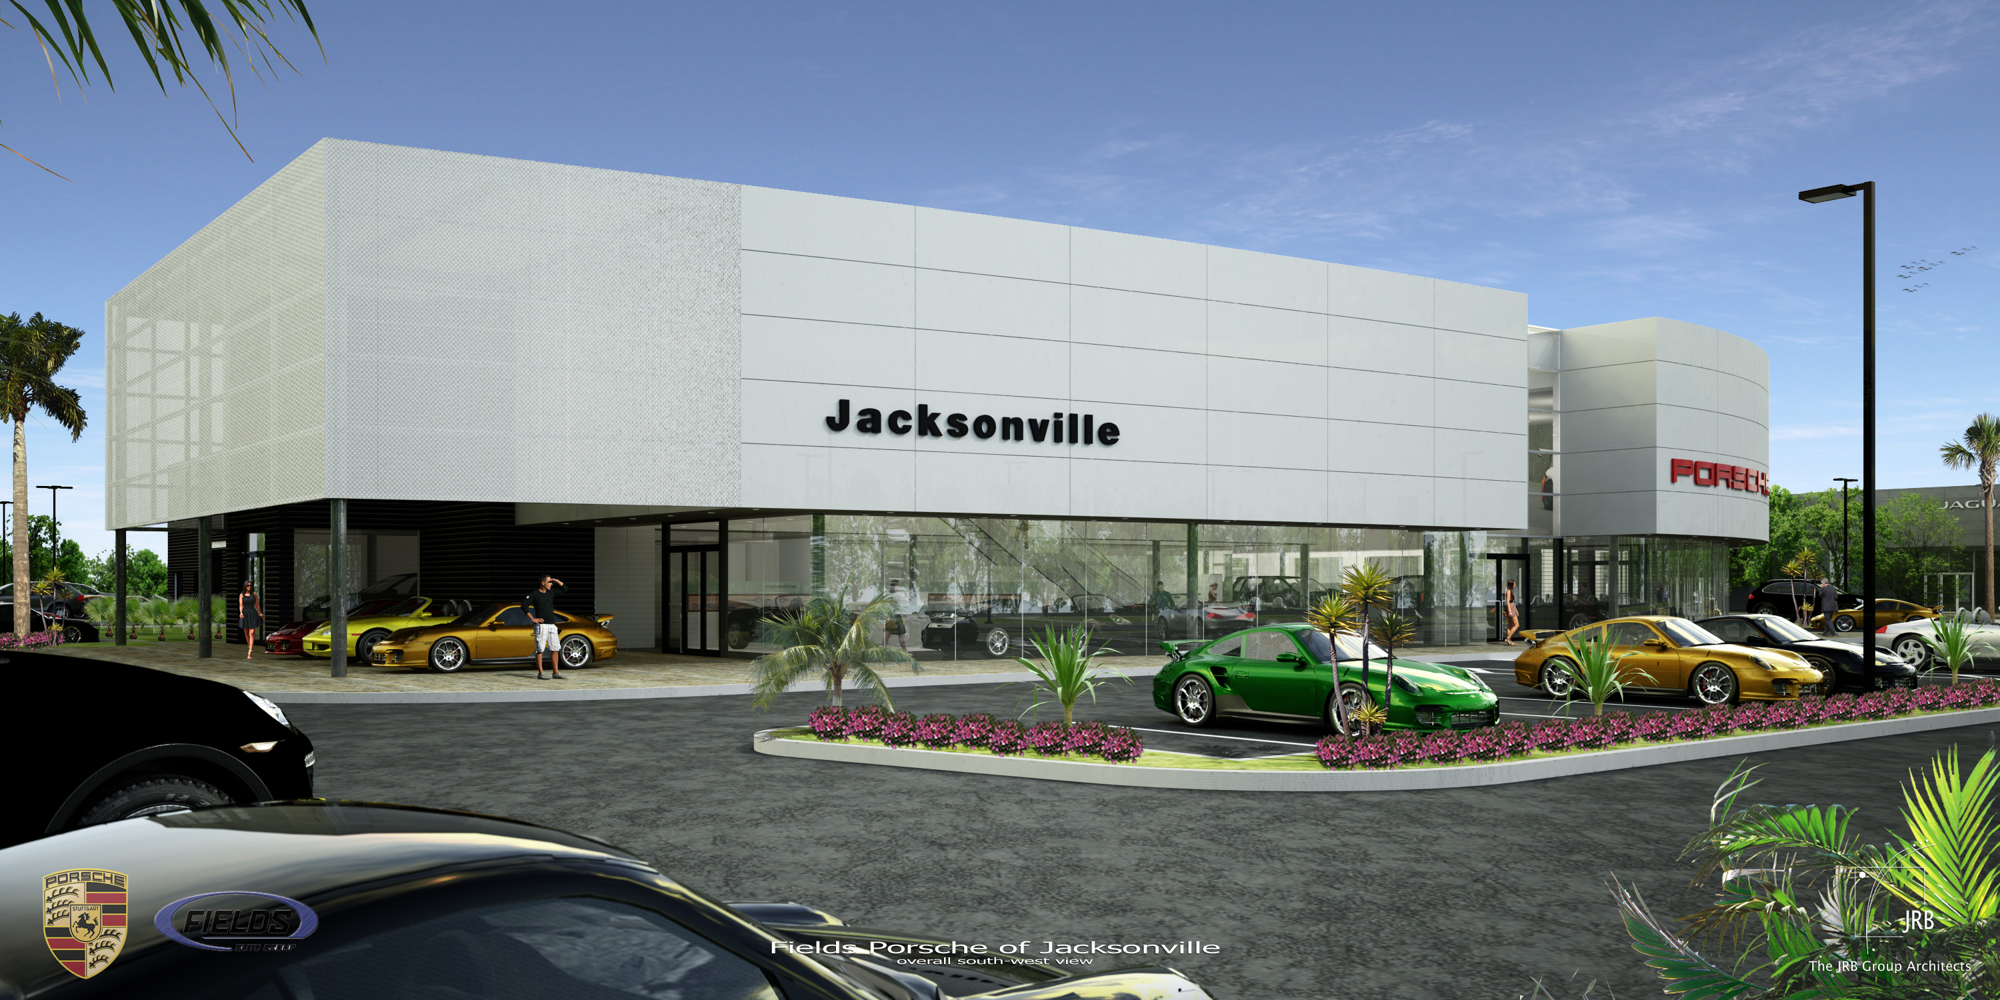 Plans show a 41,032-square-foot, two-story building for the new Porsche dealership.